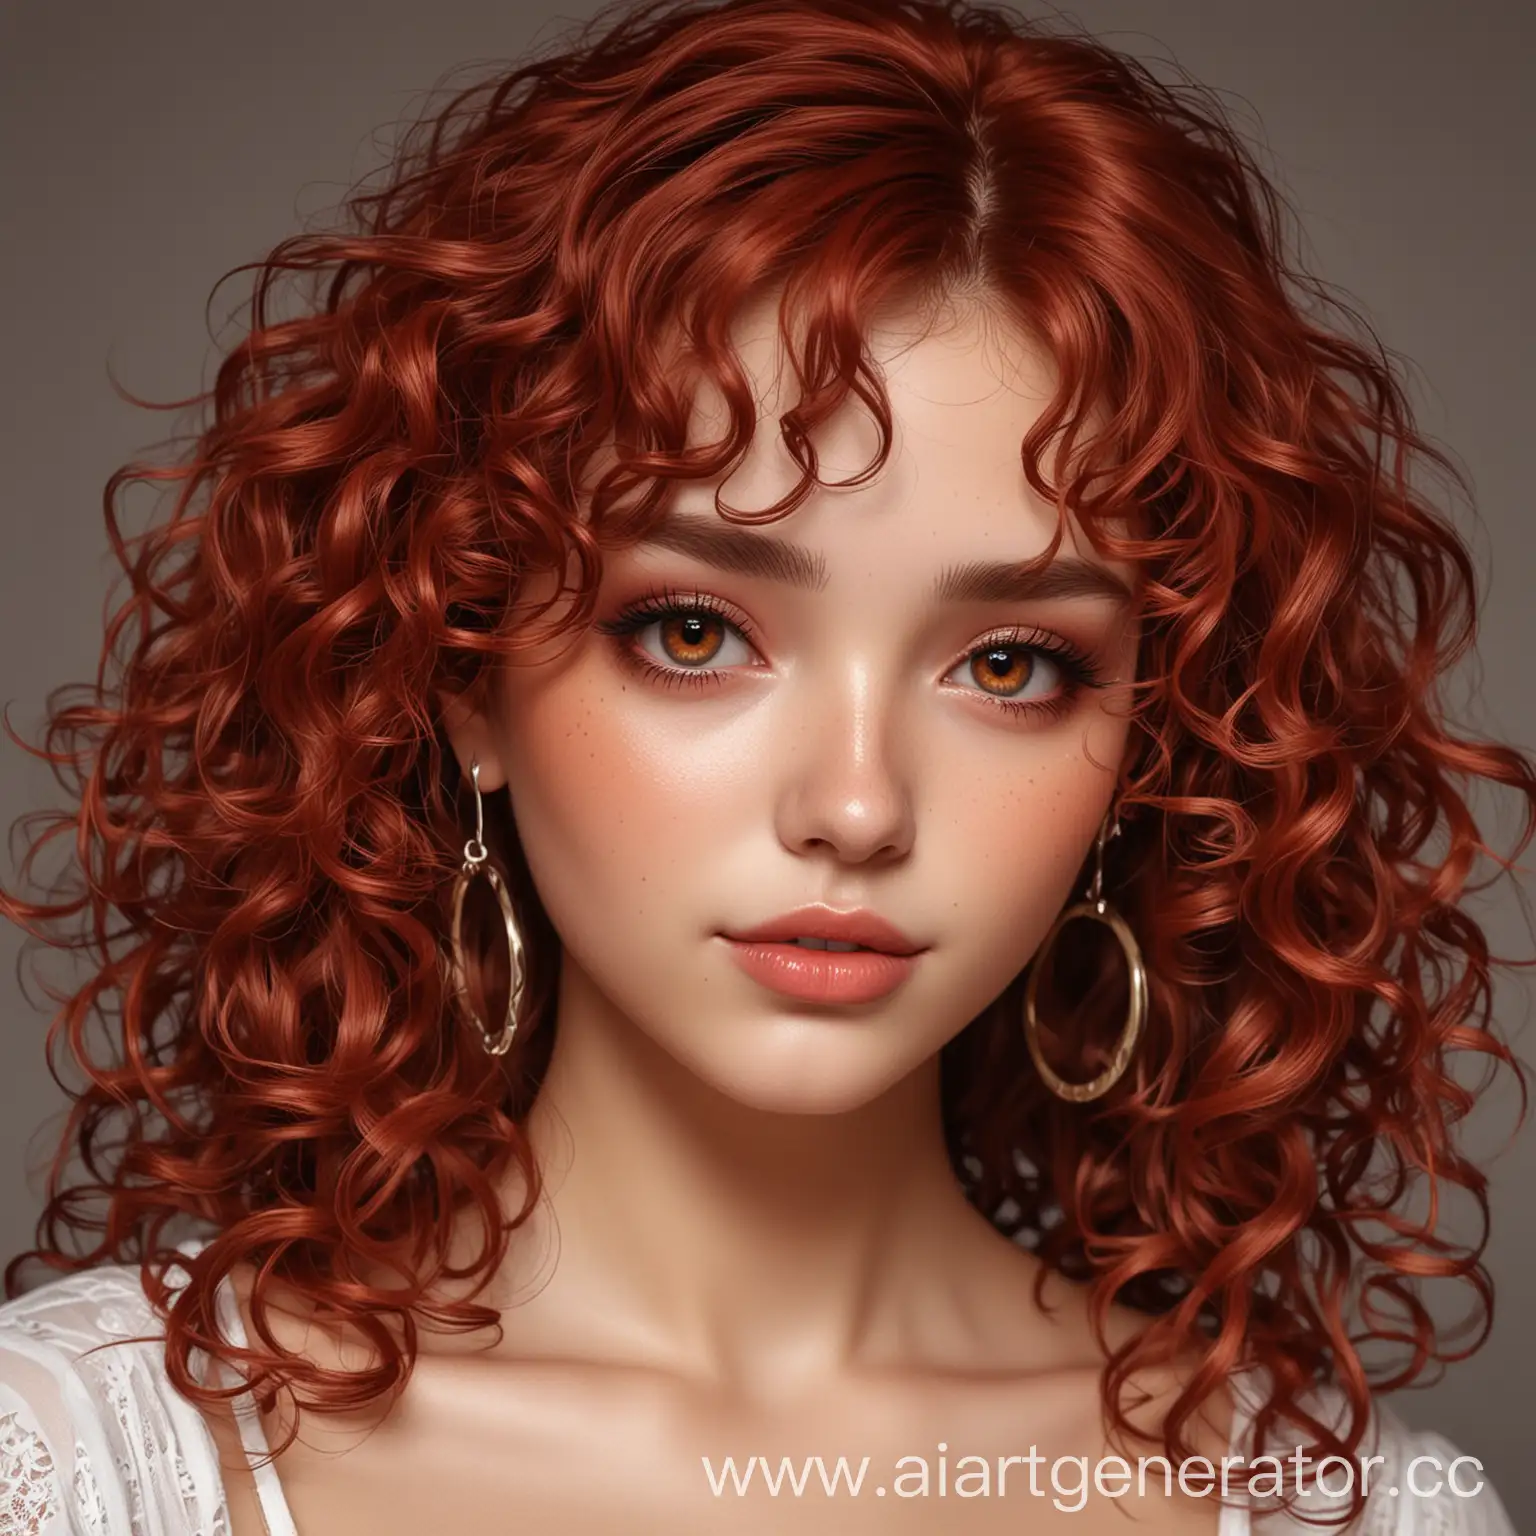 Curly-RedHaired-Girl-with-Earrings-Captivating-BrownEyed-Beauty